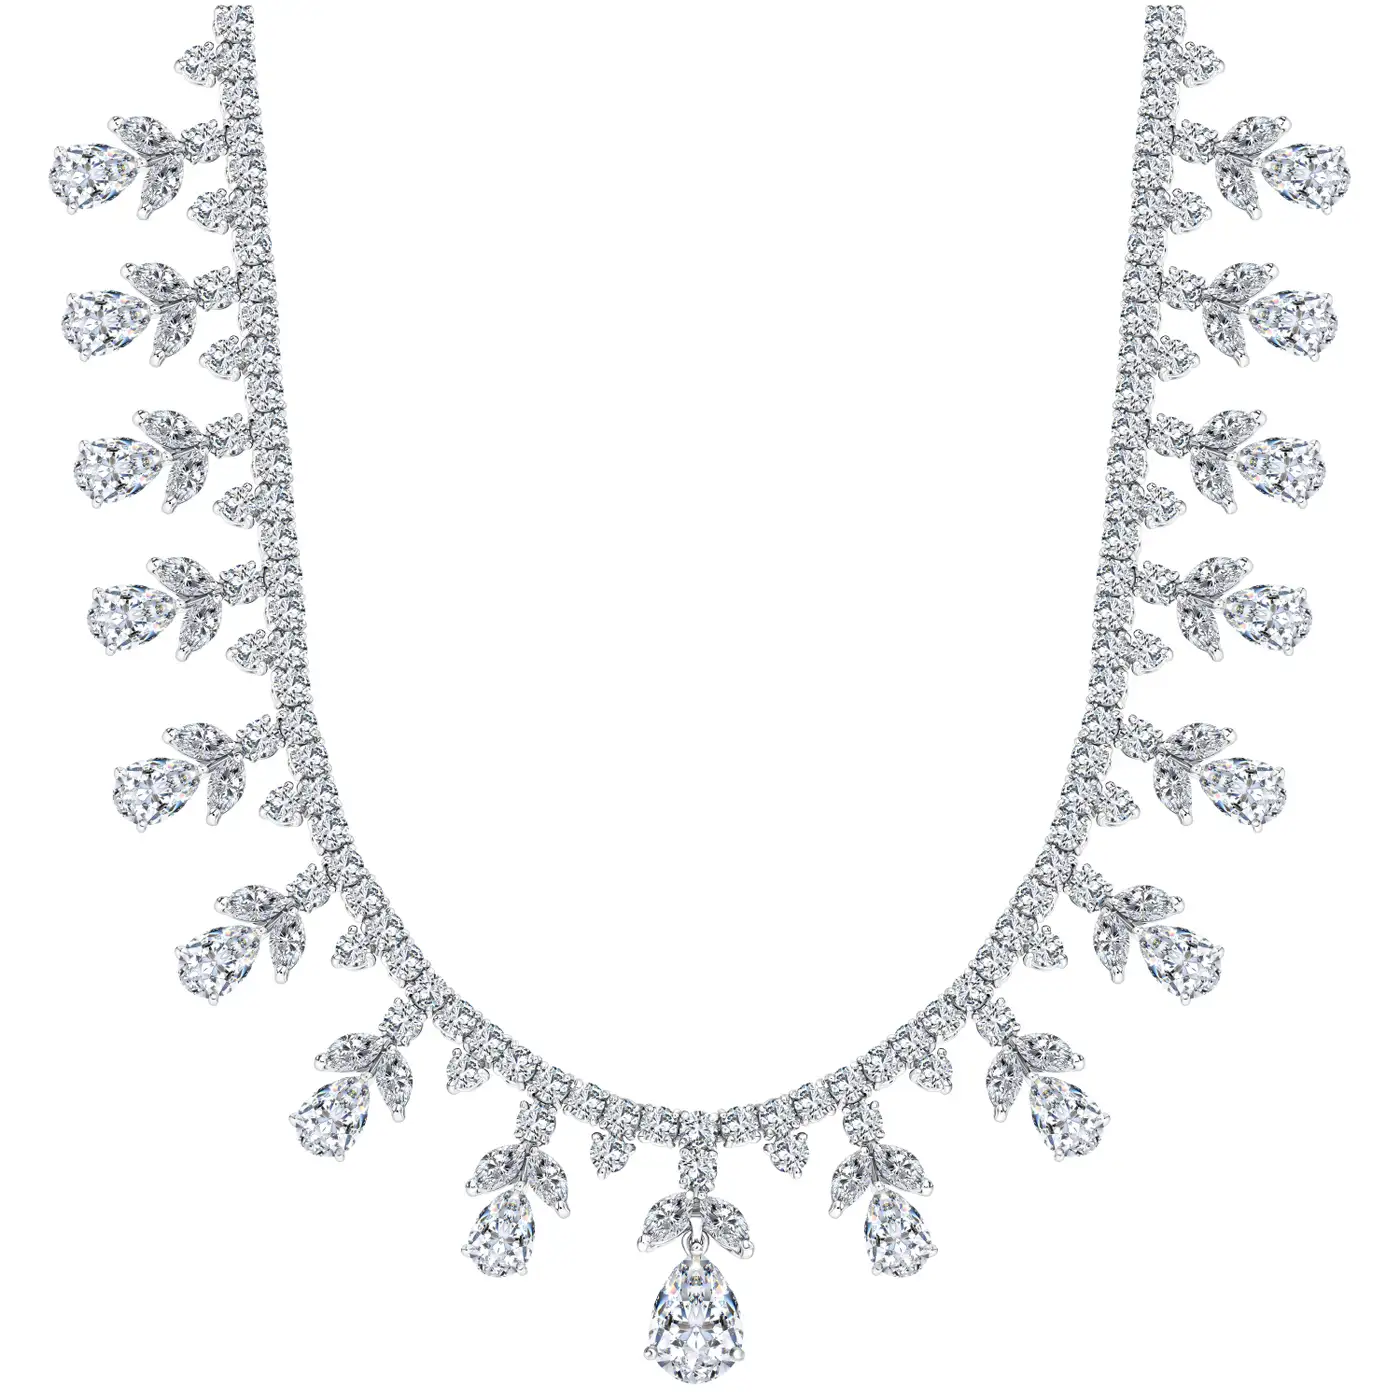 Fancy-Pear-Marquise-Shaped-Diamond-Tiara-Necklace-GIA-Certified-32.03-Carat-1.webp